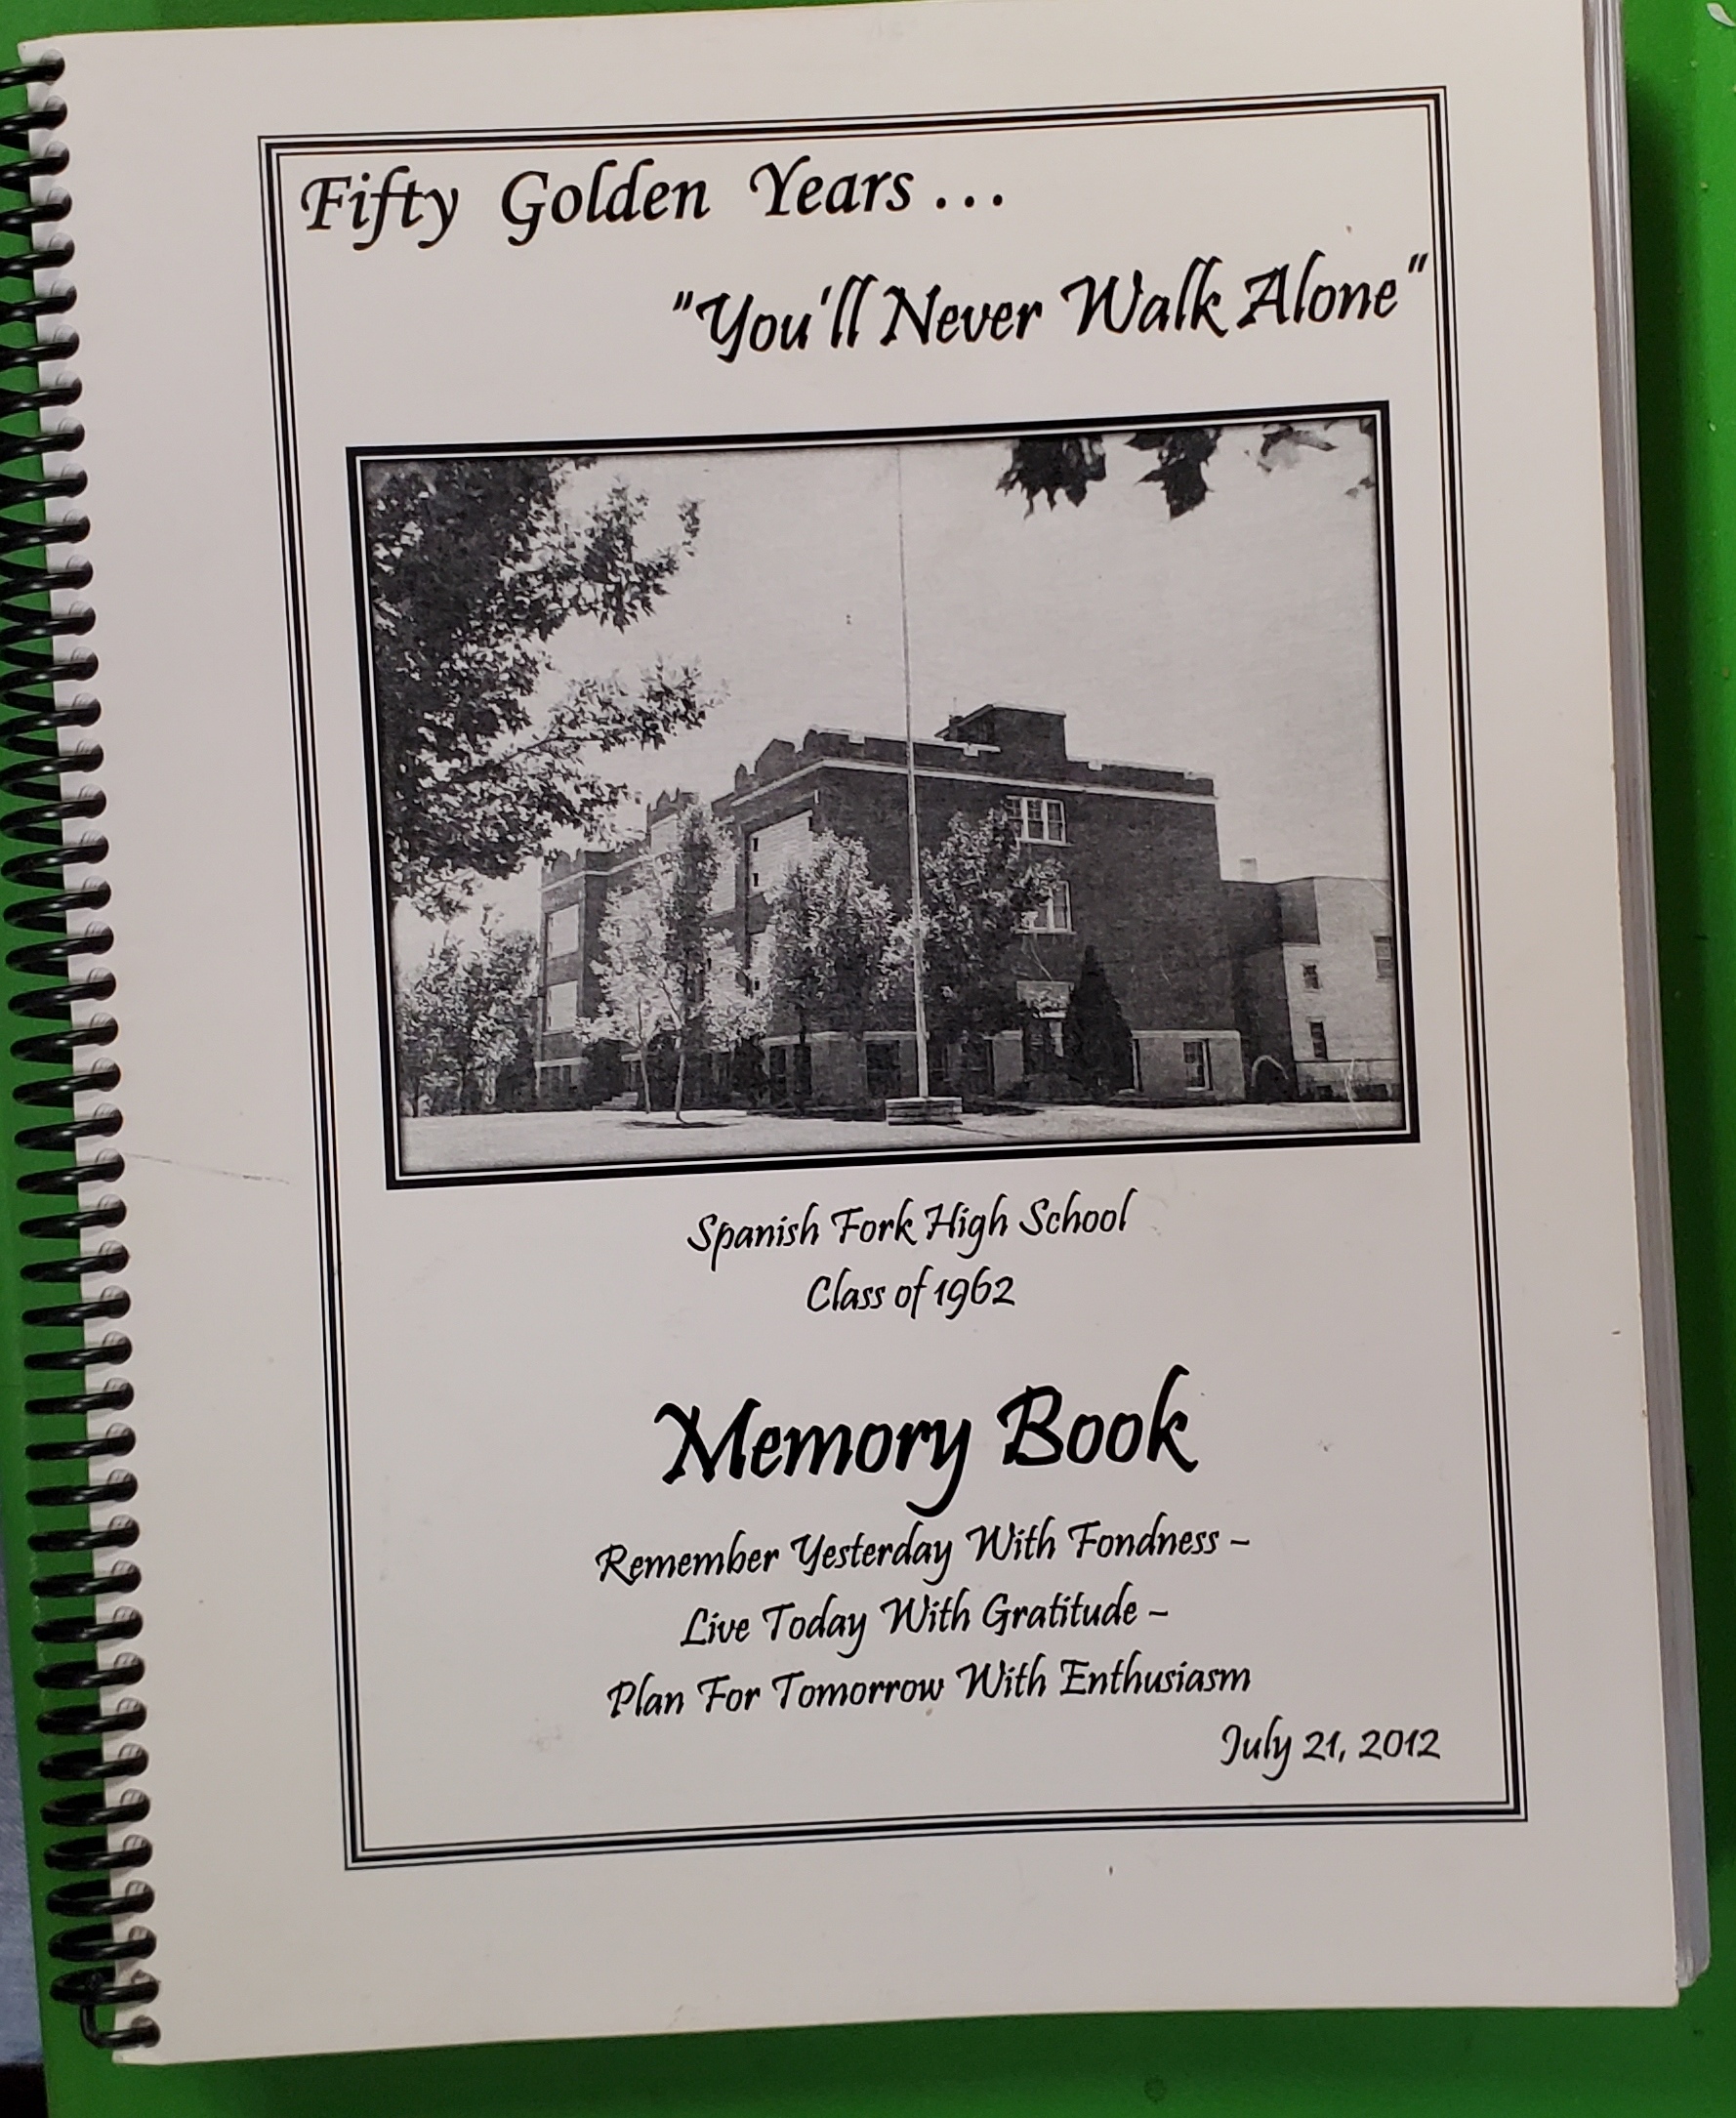 Image for FIFTY Golden Years... "You'll Never Walk Alone" Spanish Fork, Utah High School Class of 1962 Memory Book, July 2012